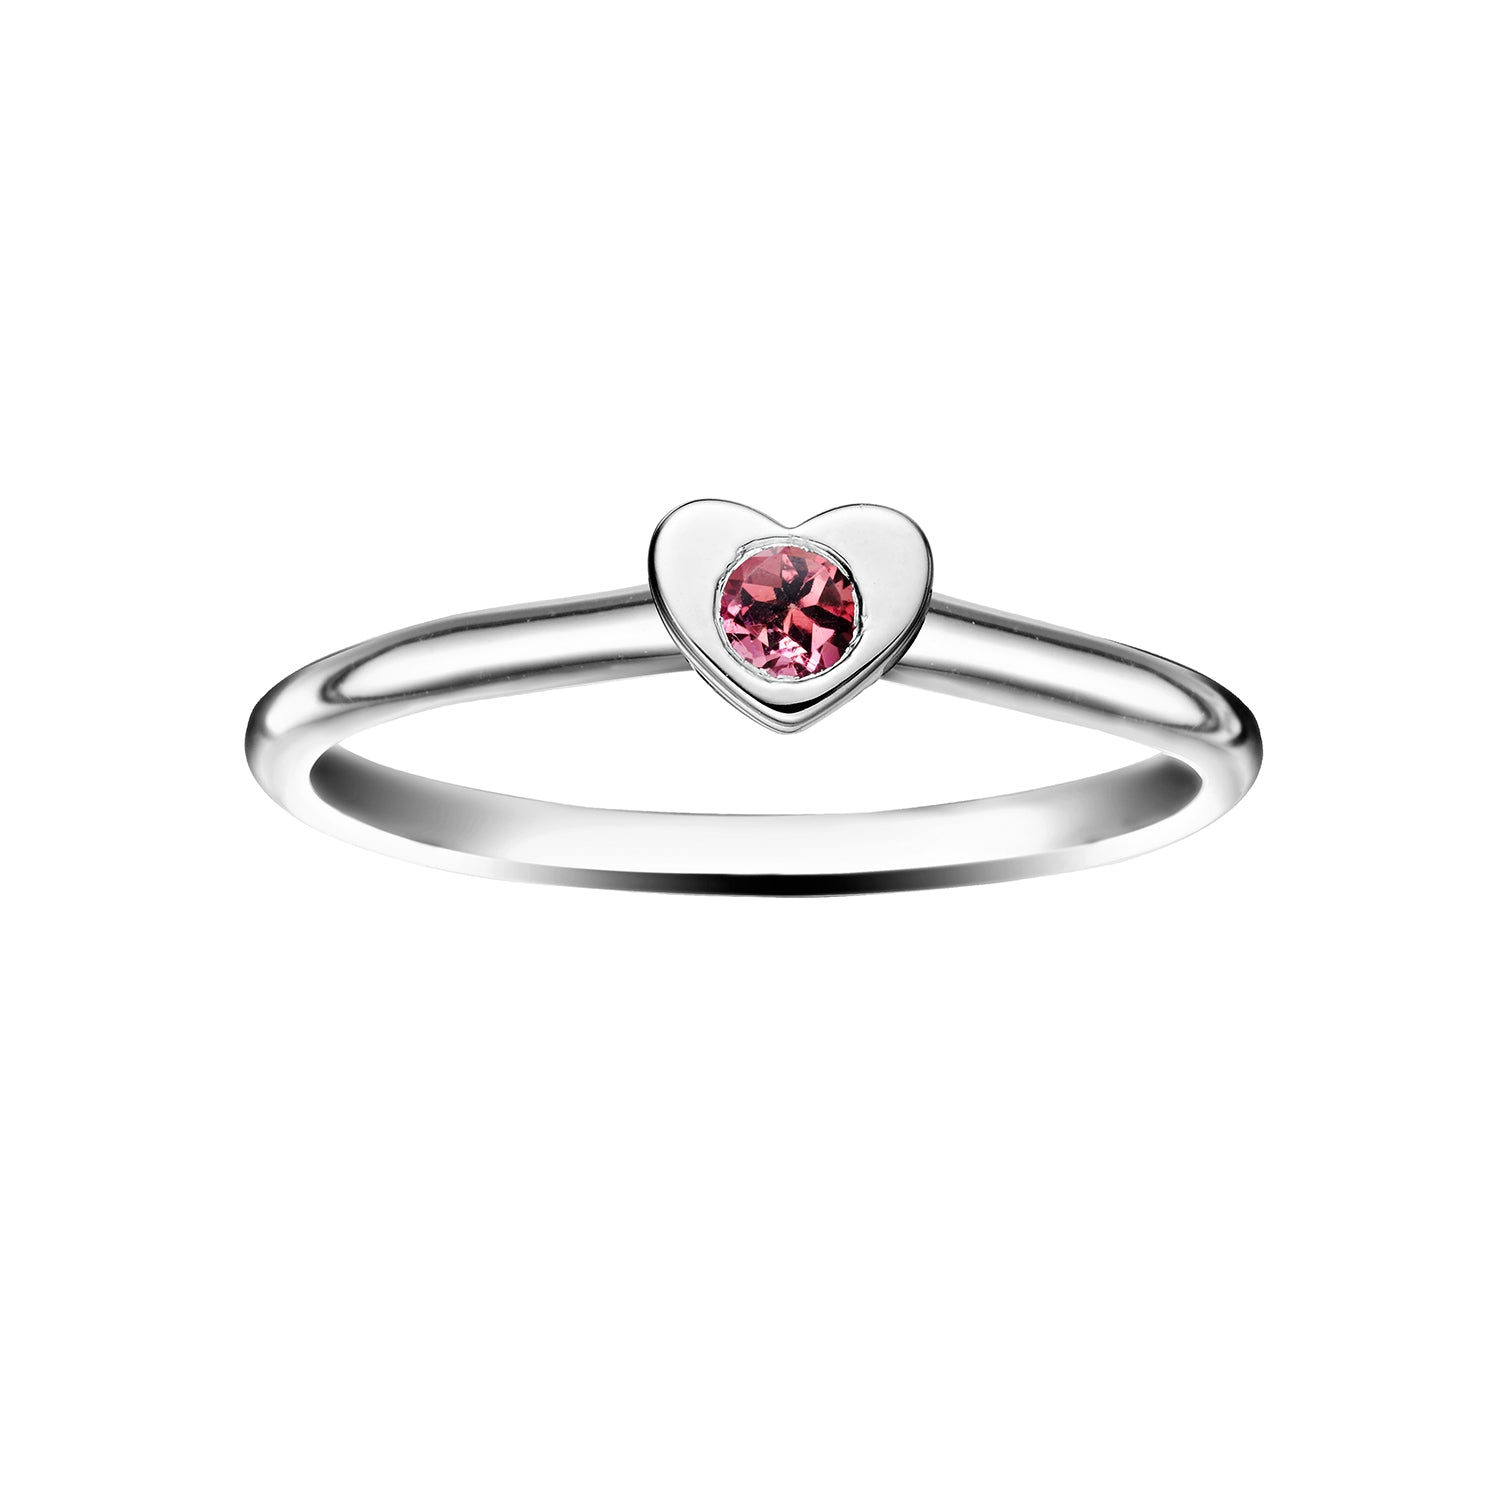 Polished Silver Heart Stacking Birthstone Rings - October / Pink Tourmaline